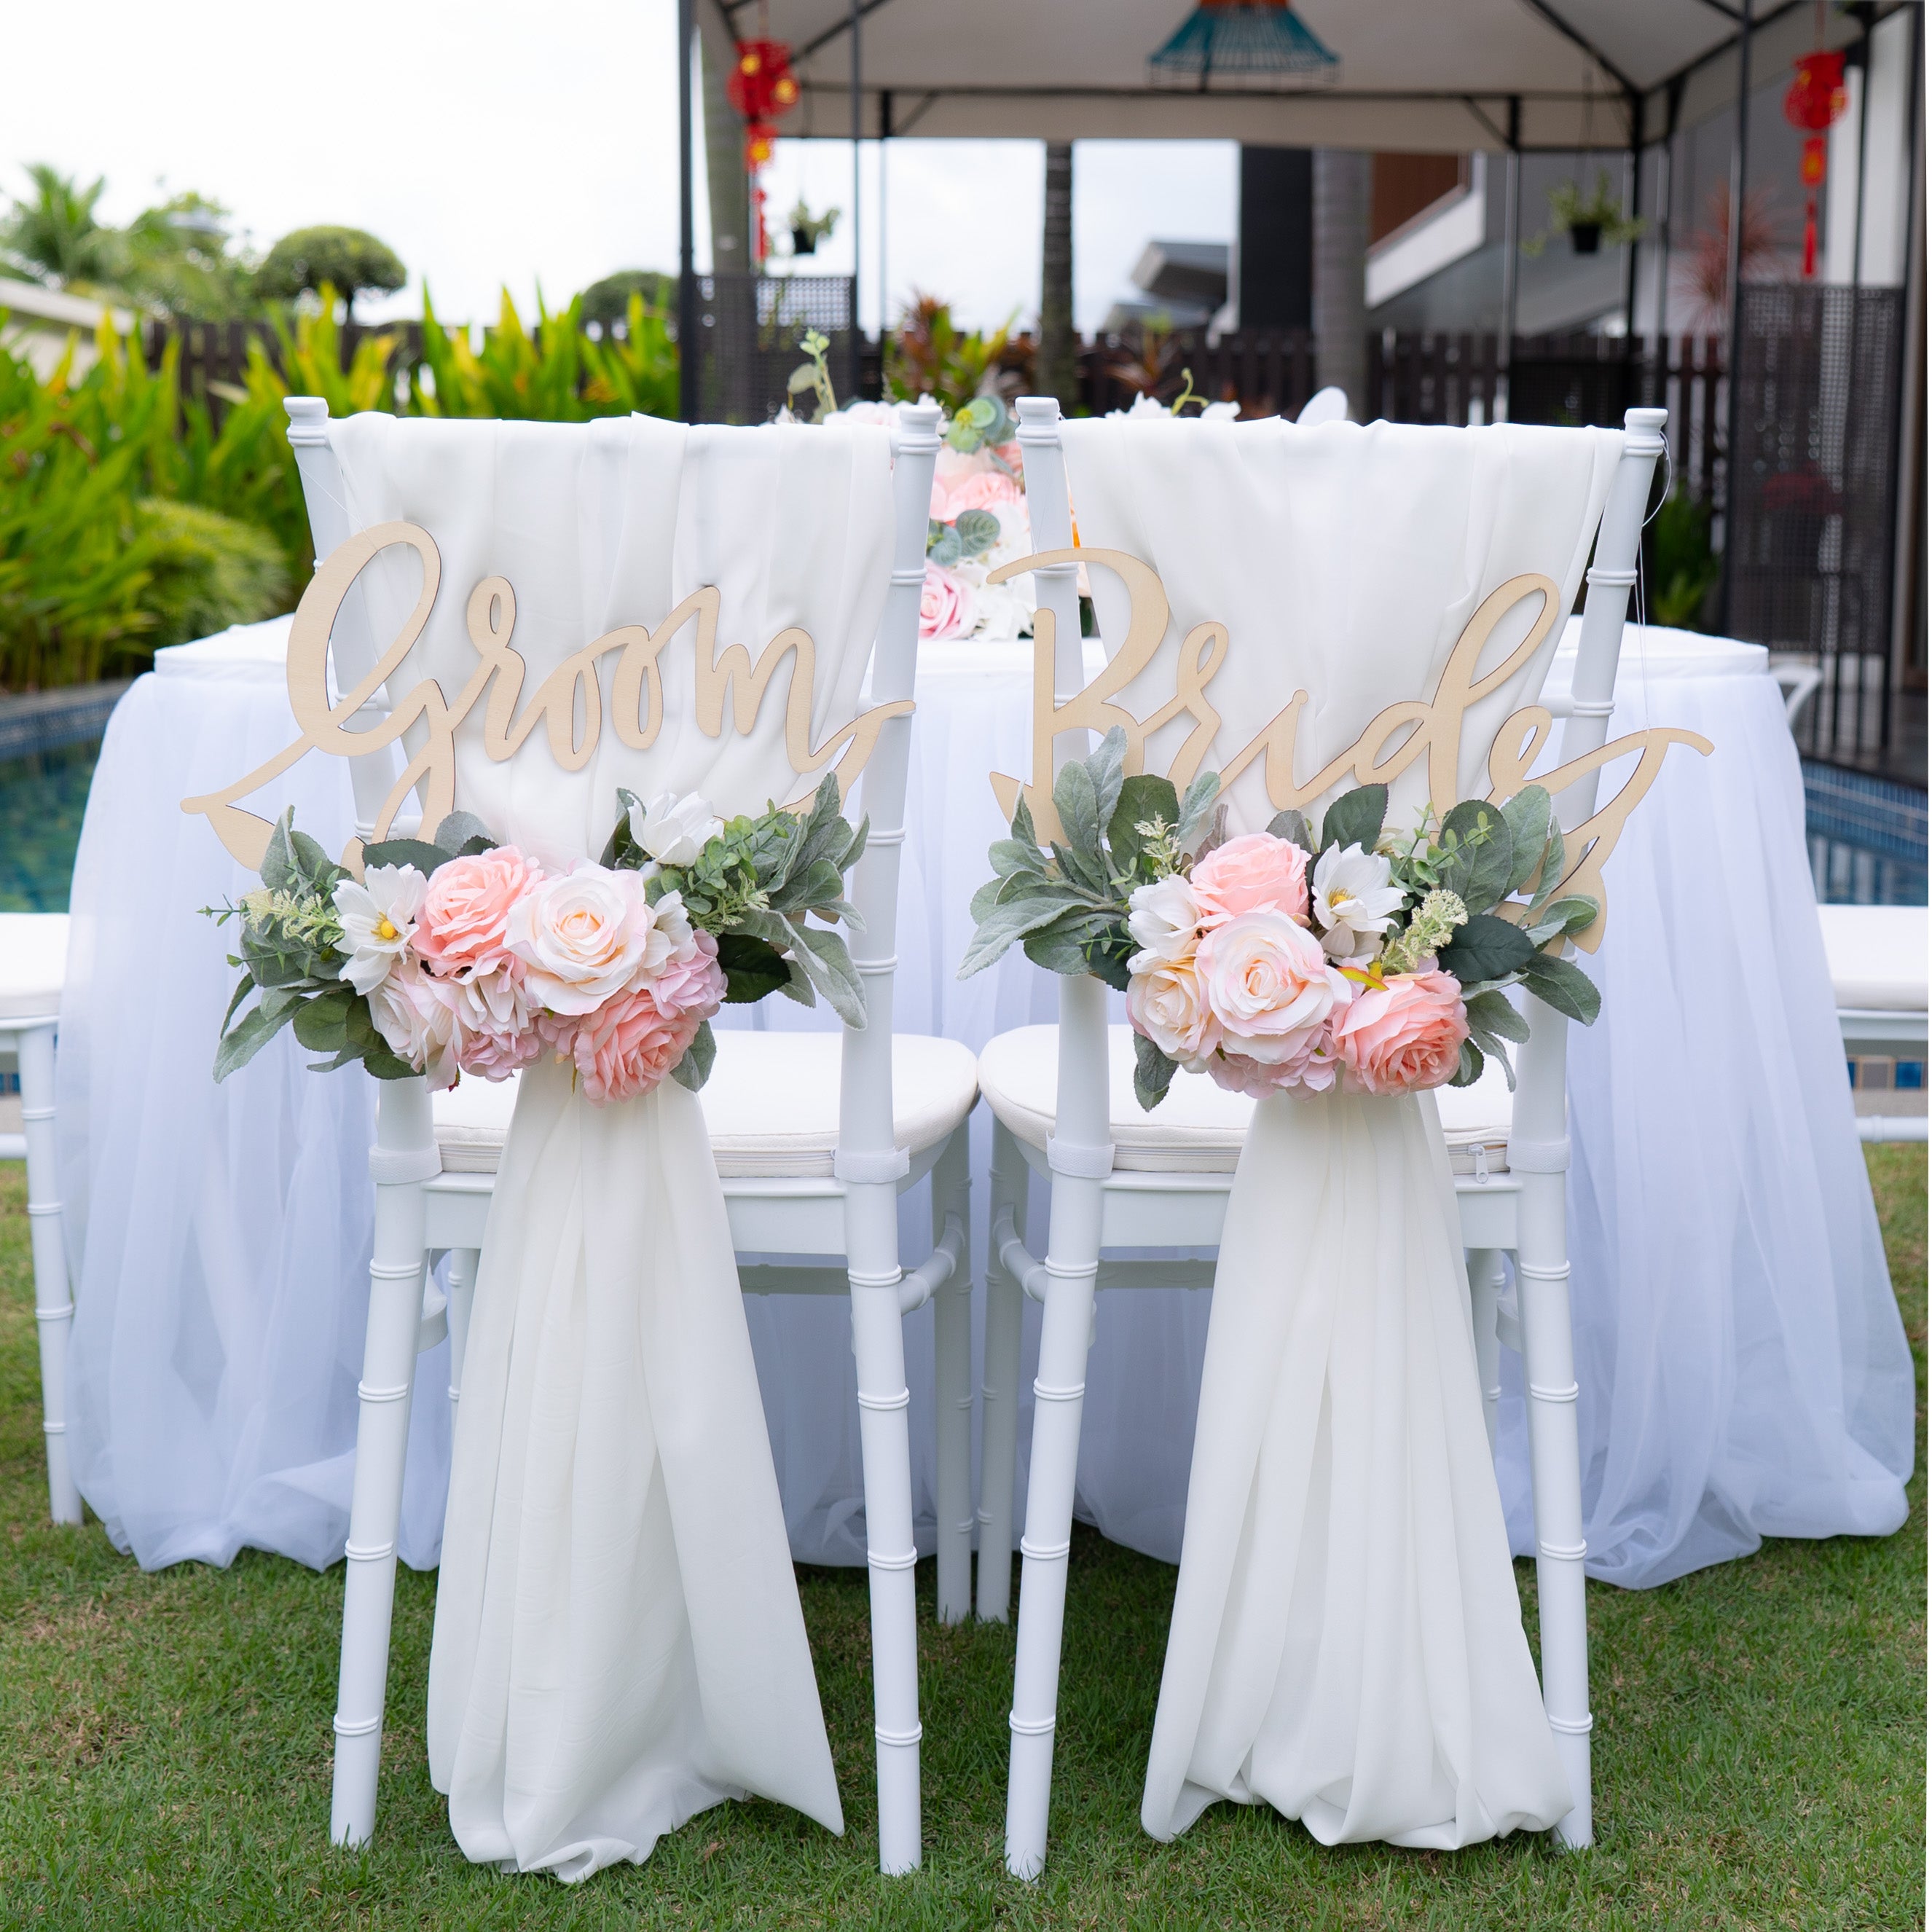 Bride & Groom Signage with Faux Floral